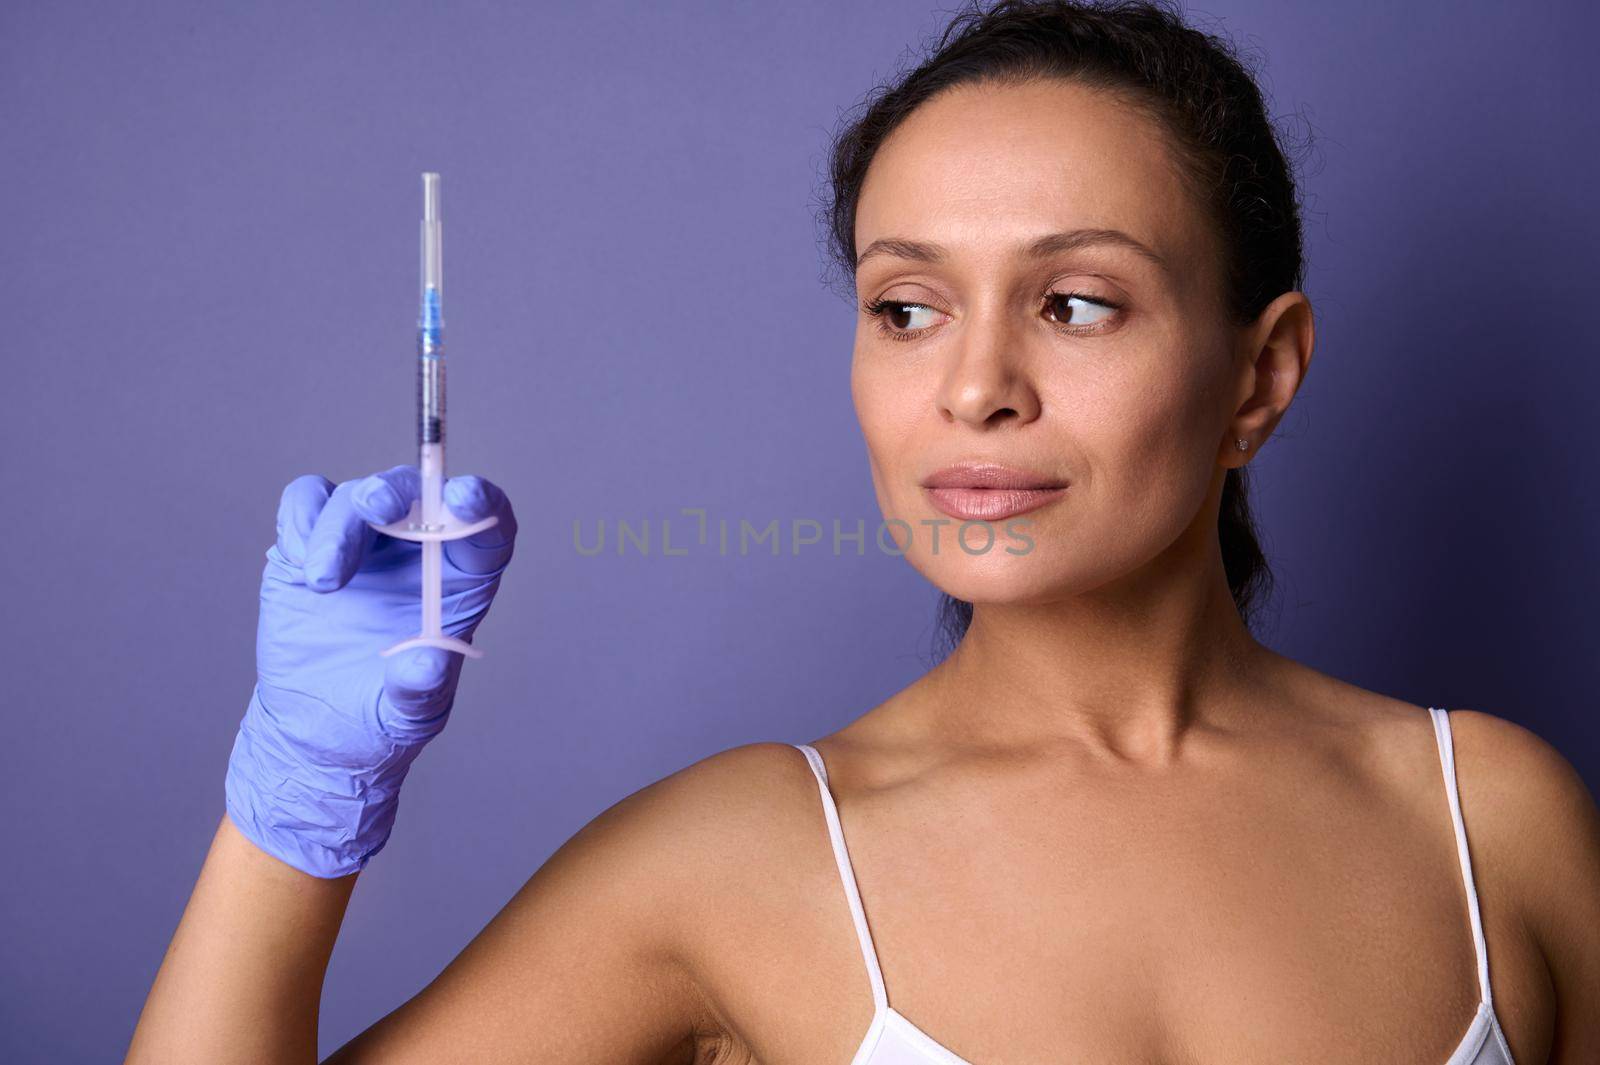 Natural beauty woman holding a syringe with rejuvenating injection in her hand, isolated on purple background with copy ad space. Cosmetology, aesthetic wellness spa concept. Healthcare and medicine by artgf